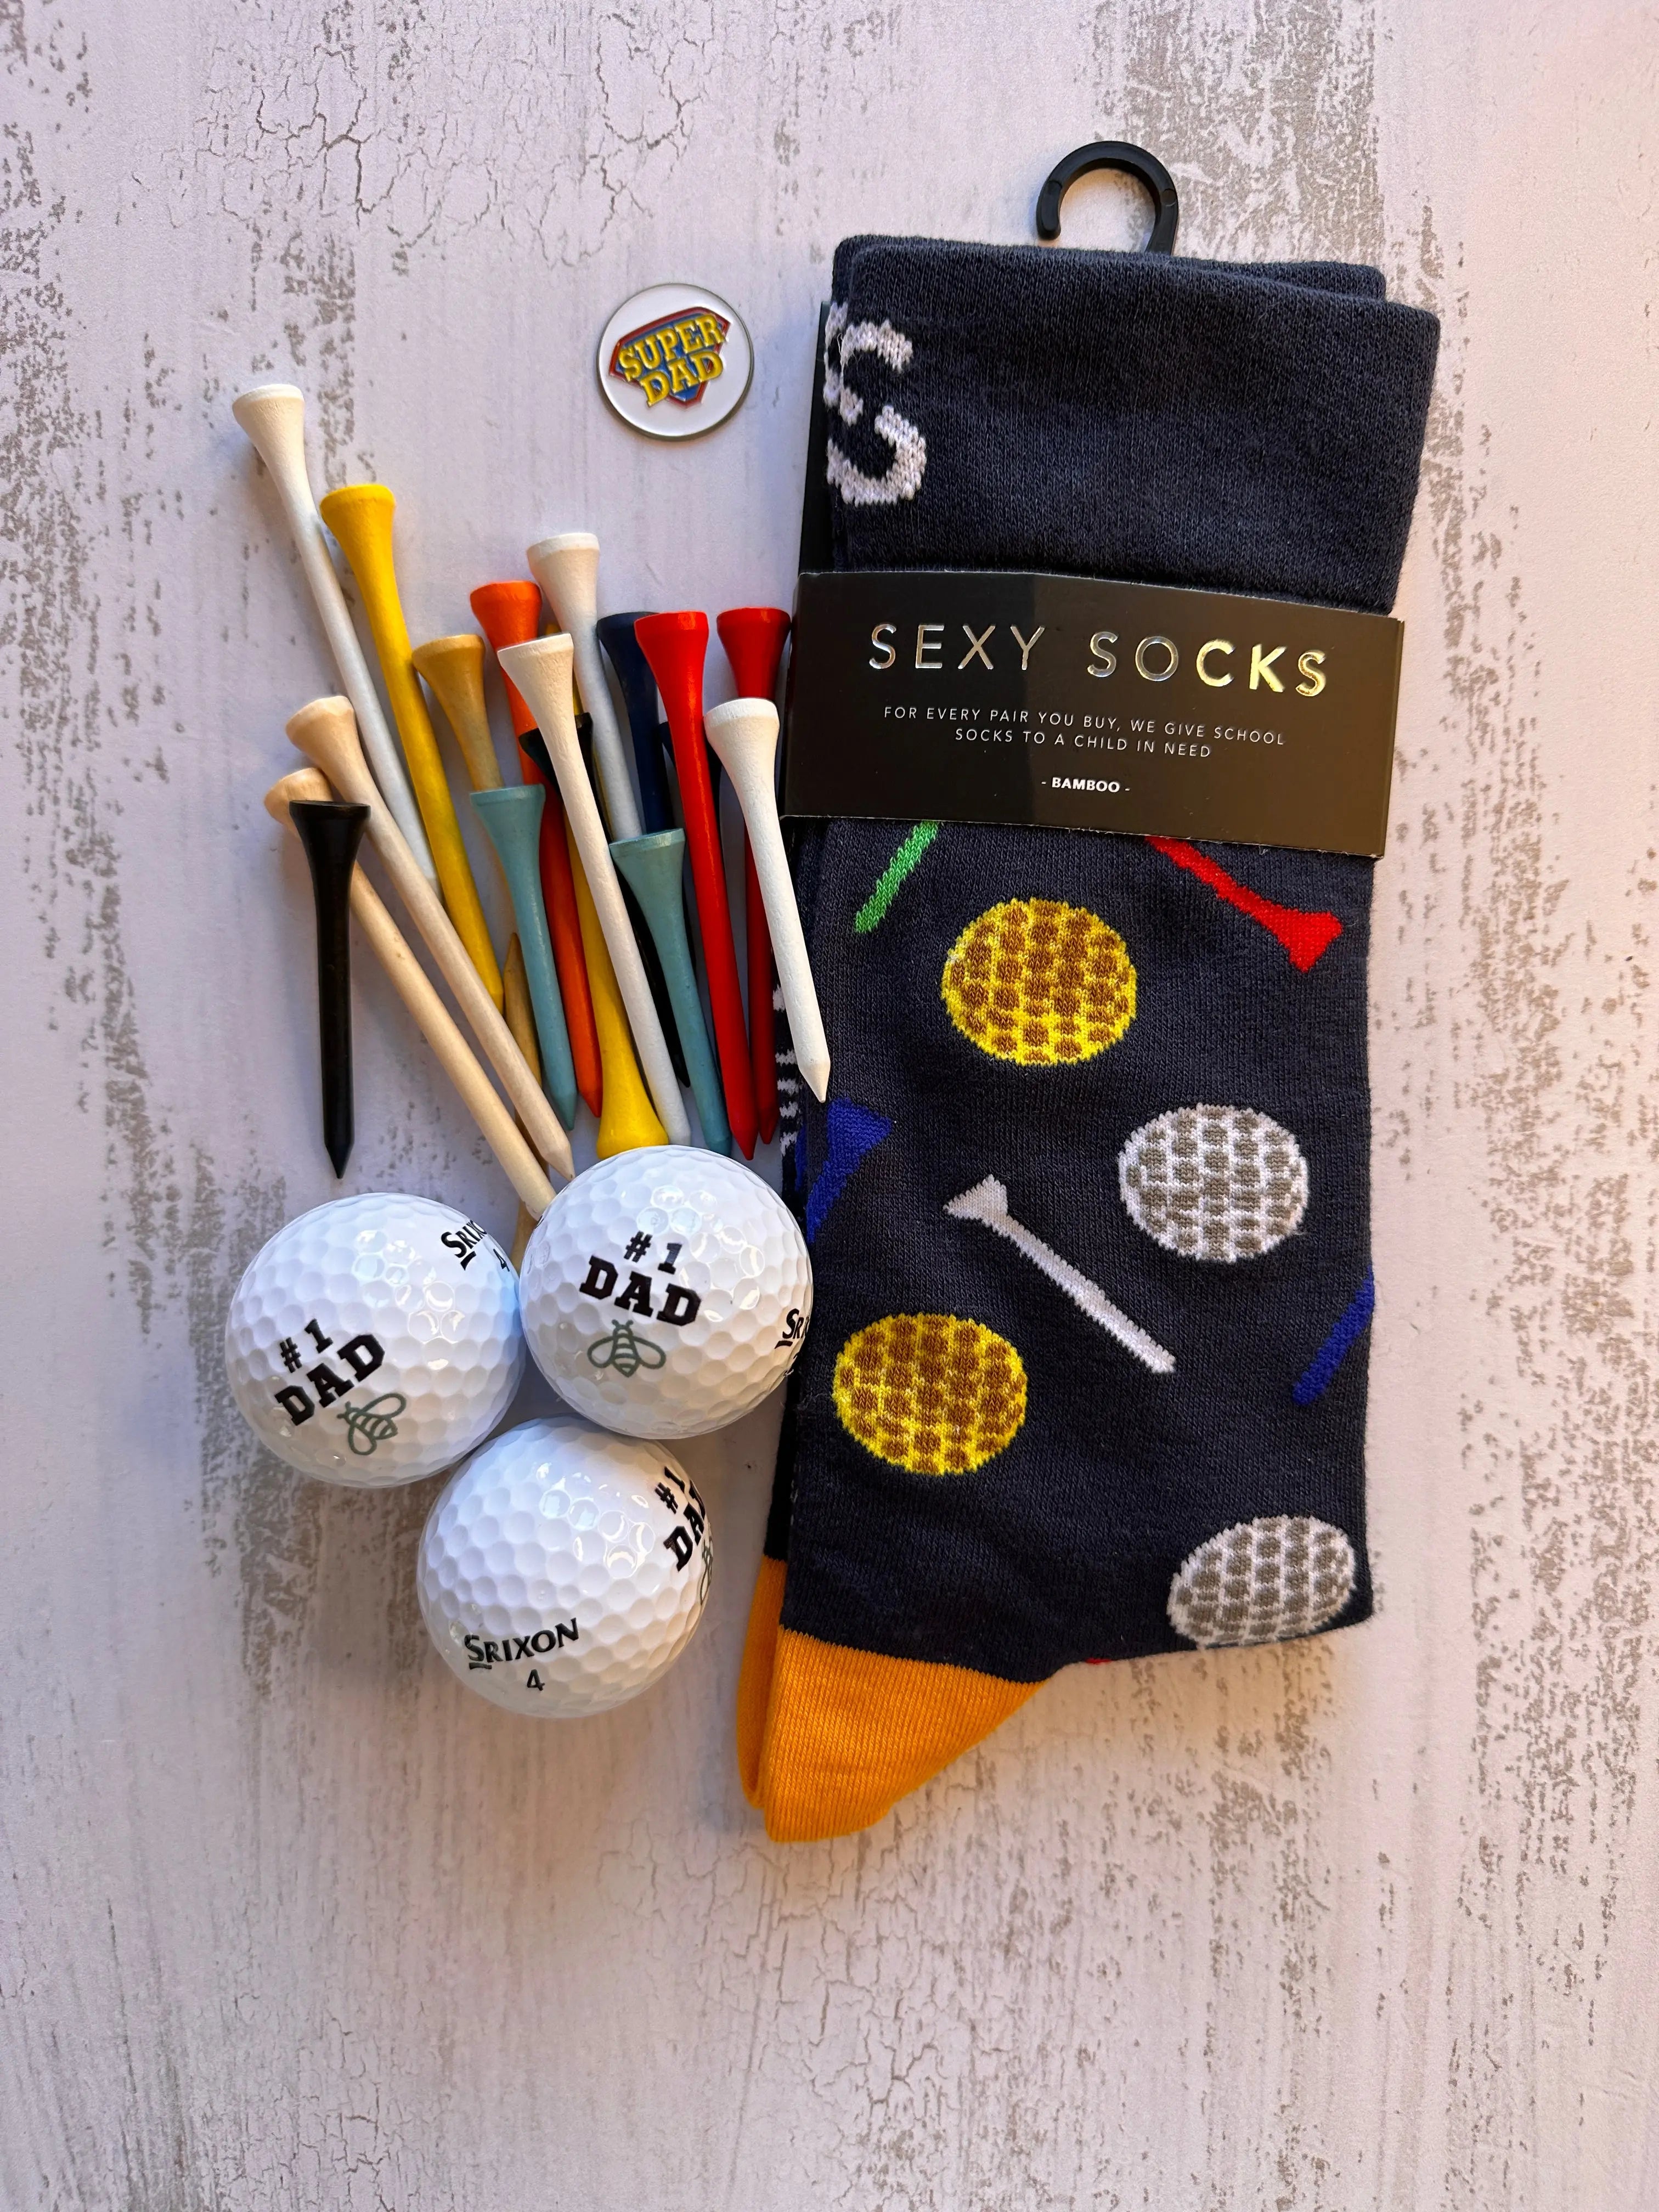 Tee-rific Dad's Delight Bee Festive golf gift gifts for men south africa socks